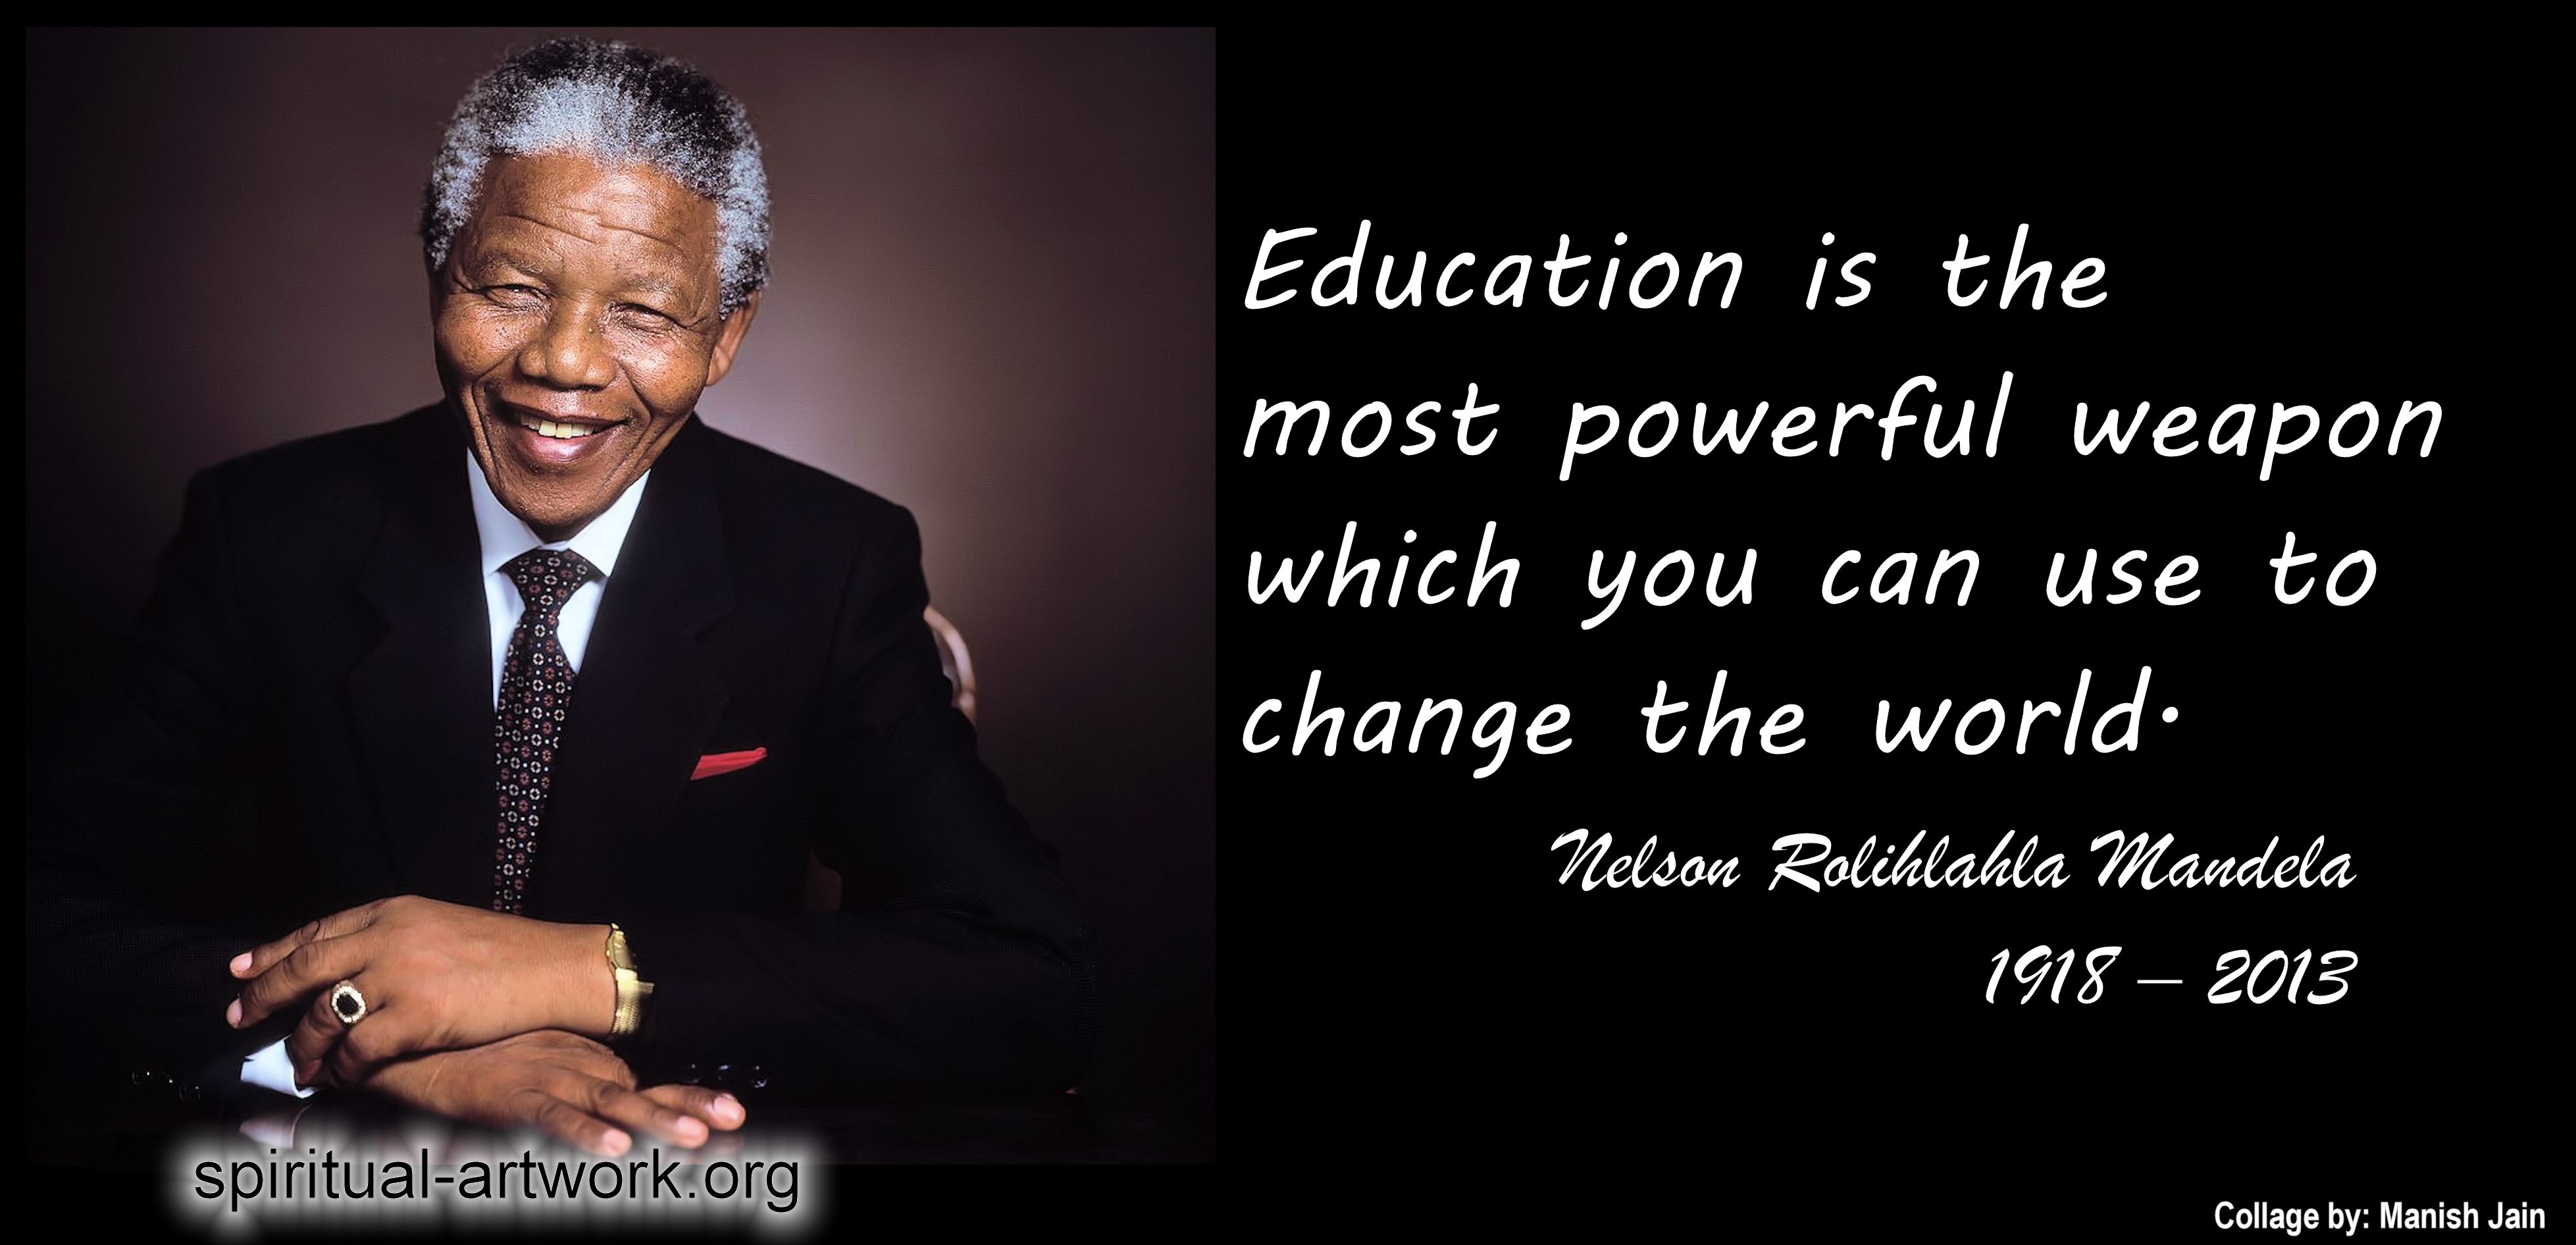 controversial education quotes